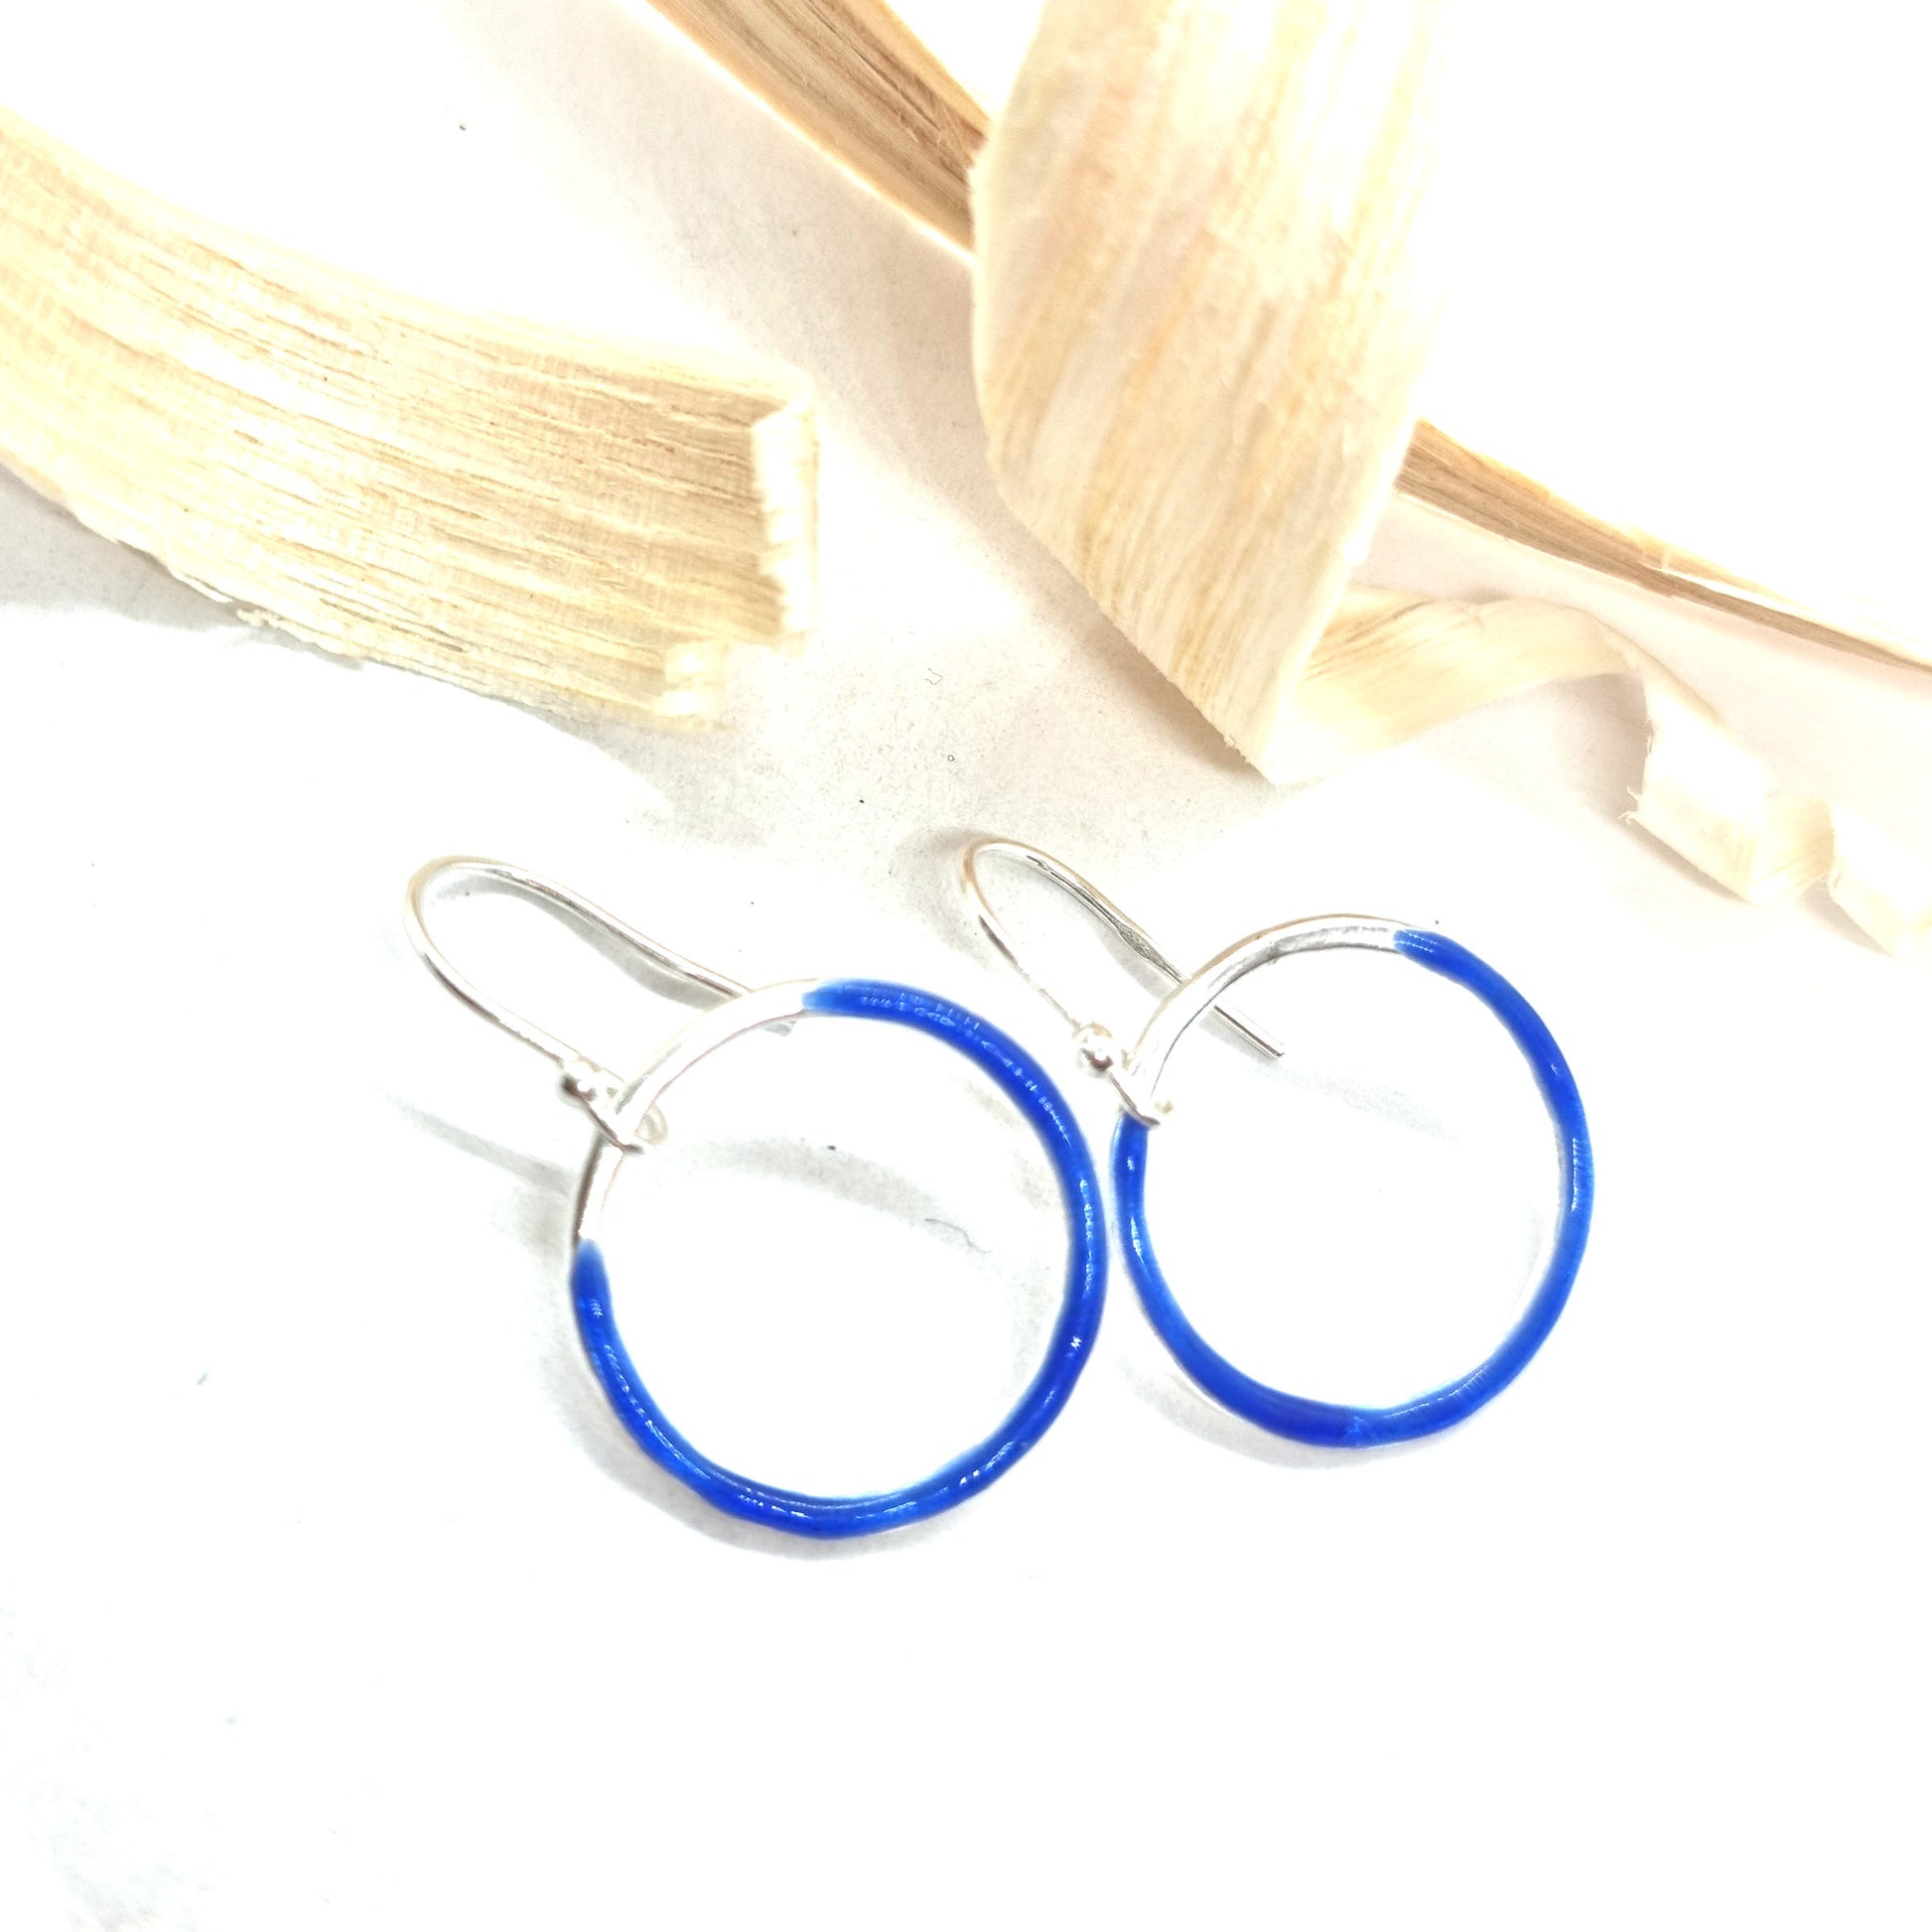 Silver open circle drop earrings with royal blue enamel. Shown with wood shavings.